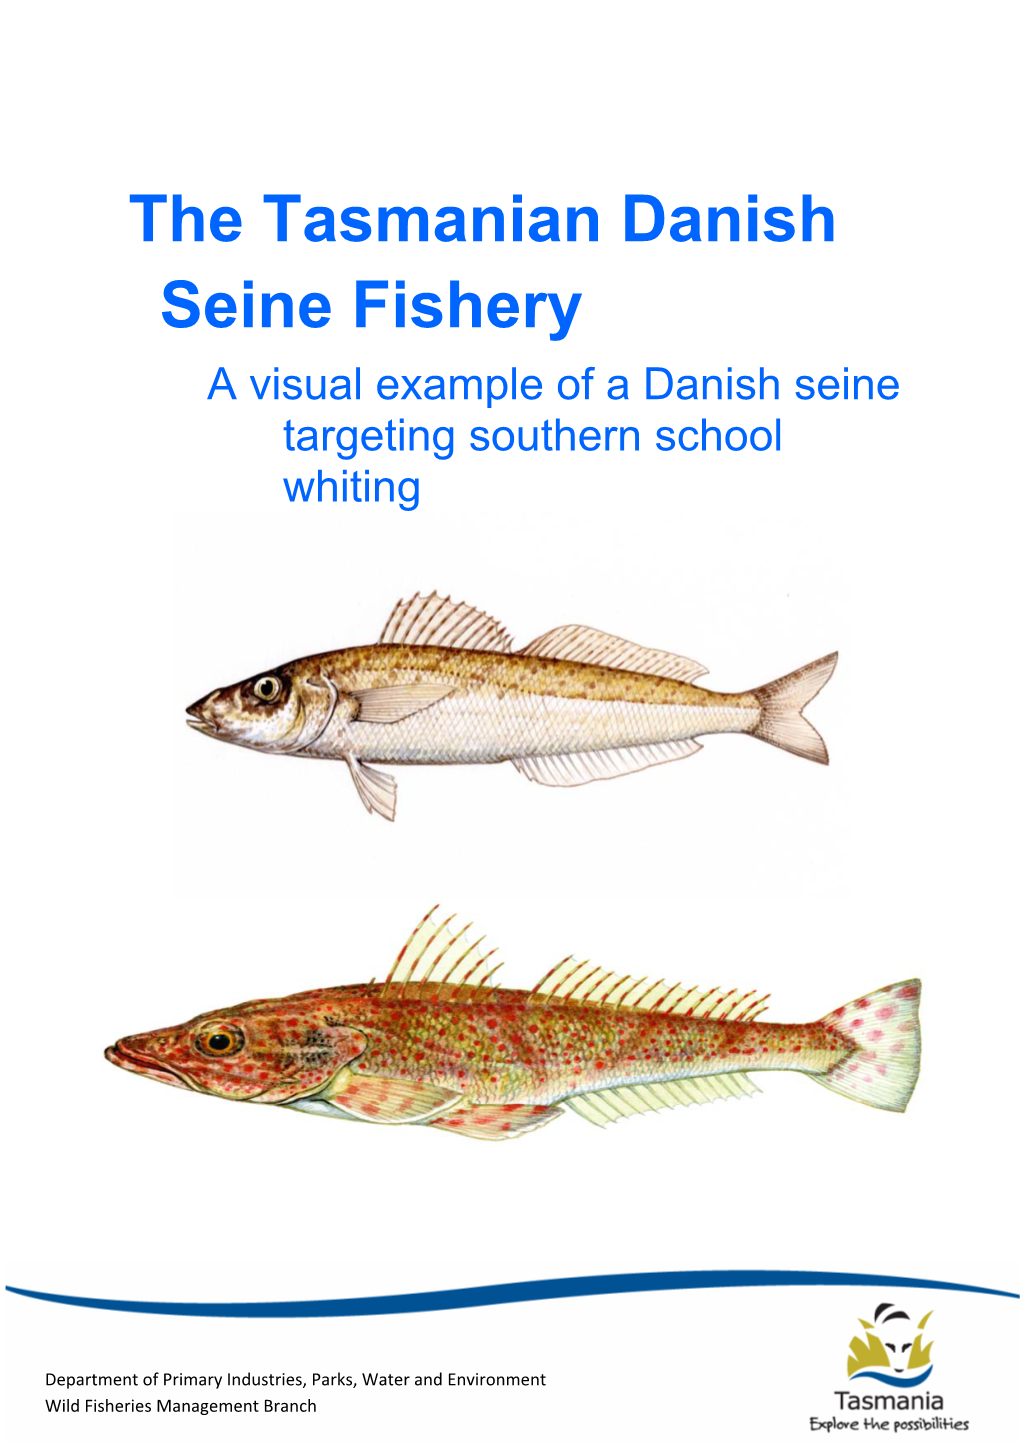 The Tasmanian Danish Seine Fishery a Visual Example of a Danish Seine Targeting Southern School Whiting